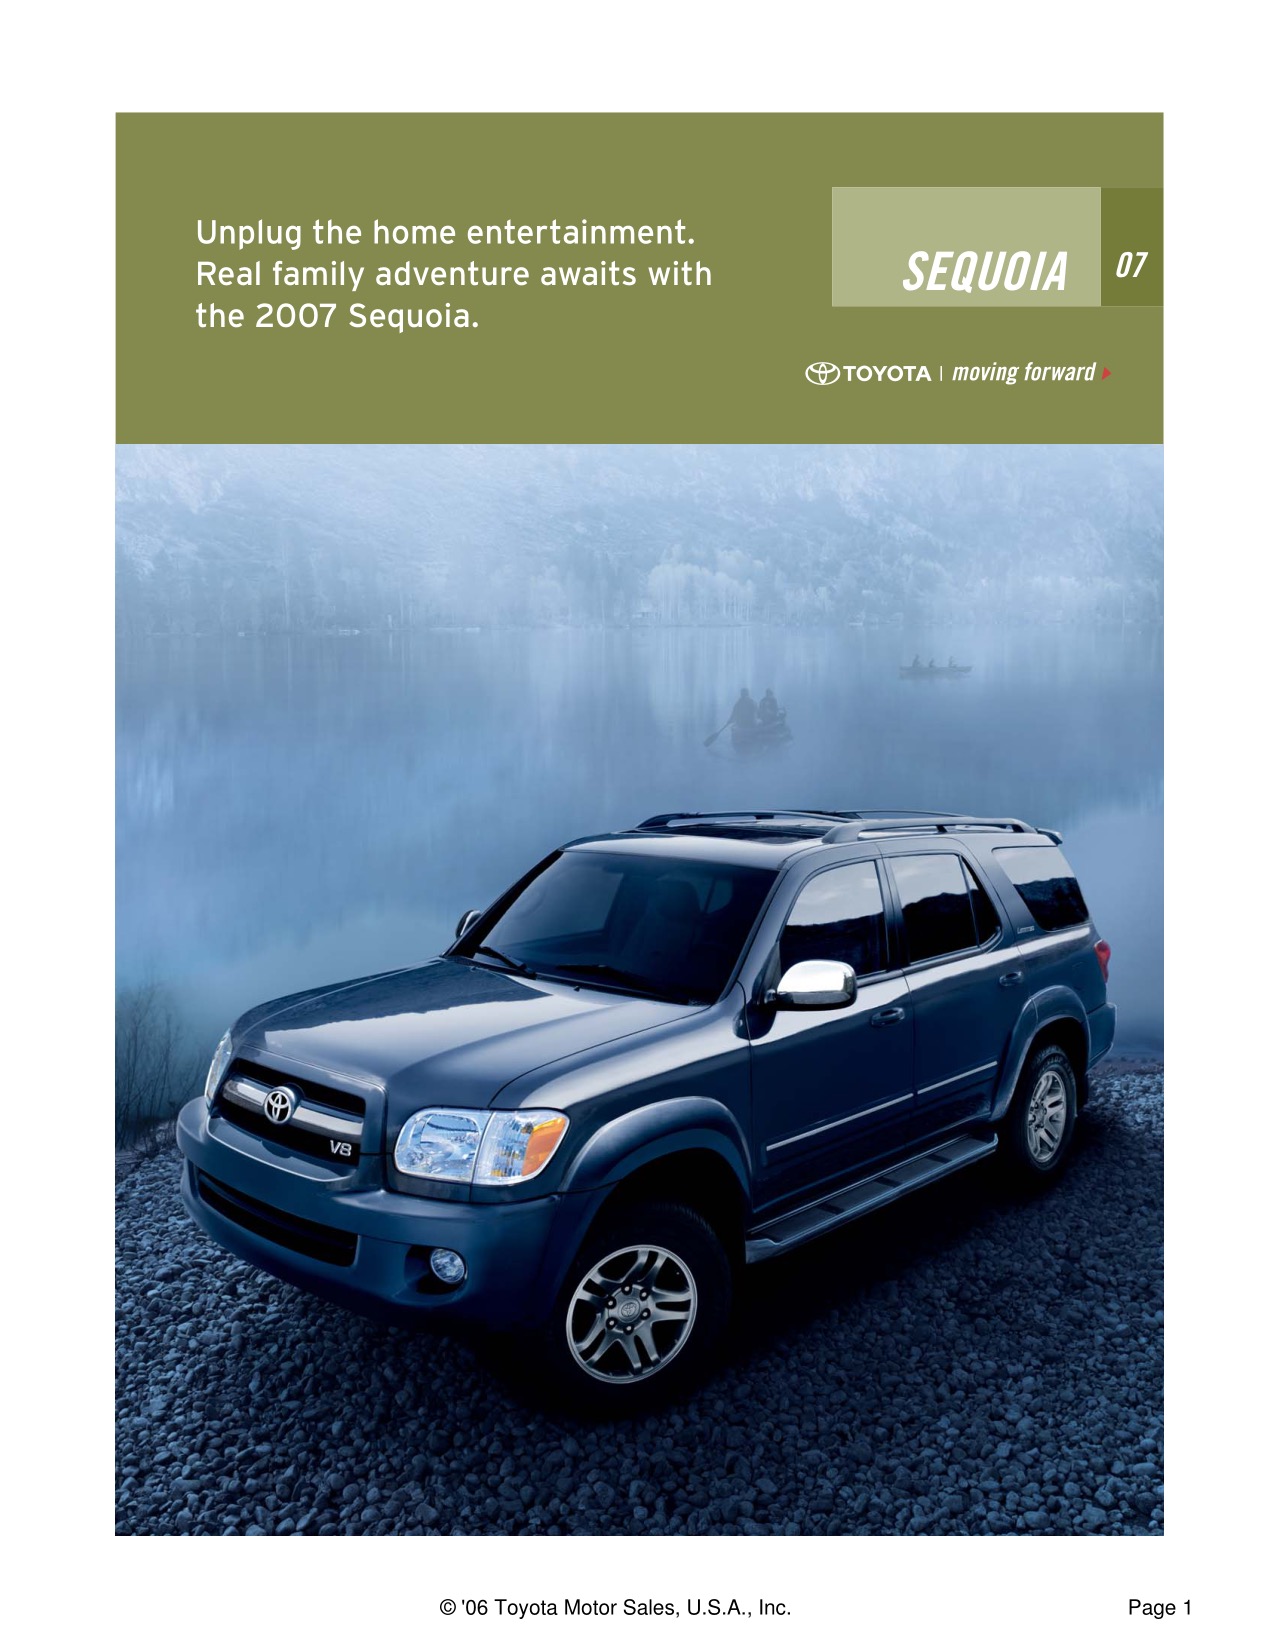 2007 Toyota Sequoia Brochure Page 1